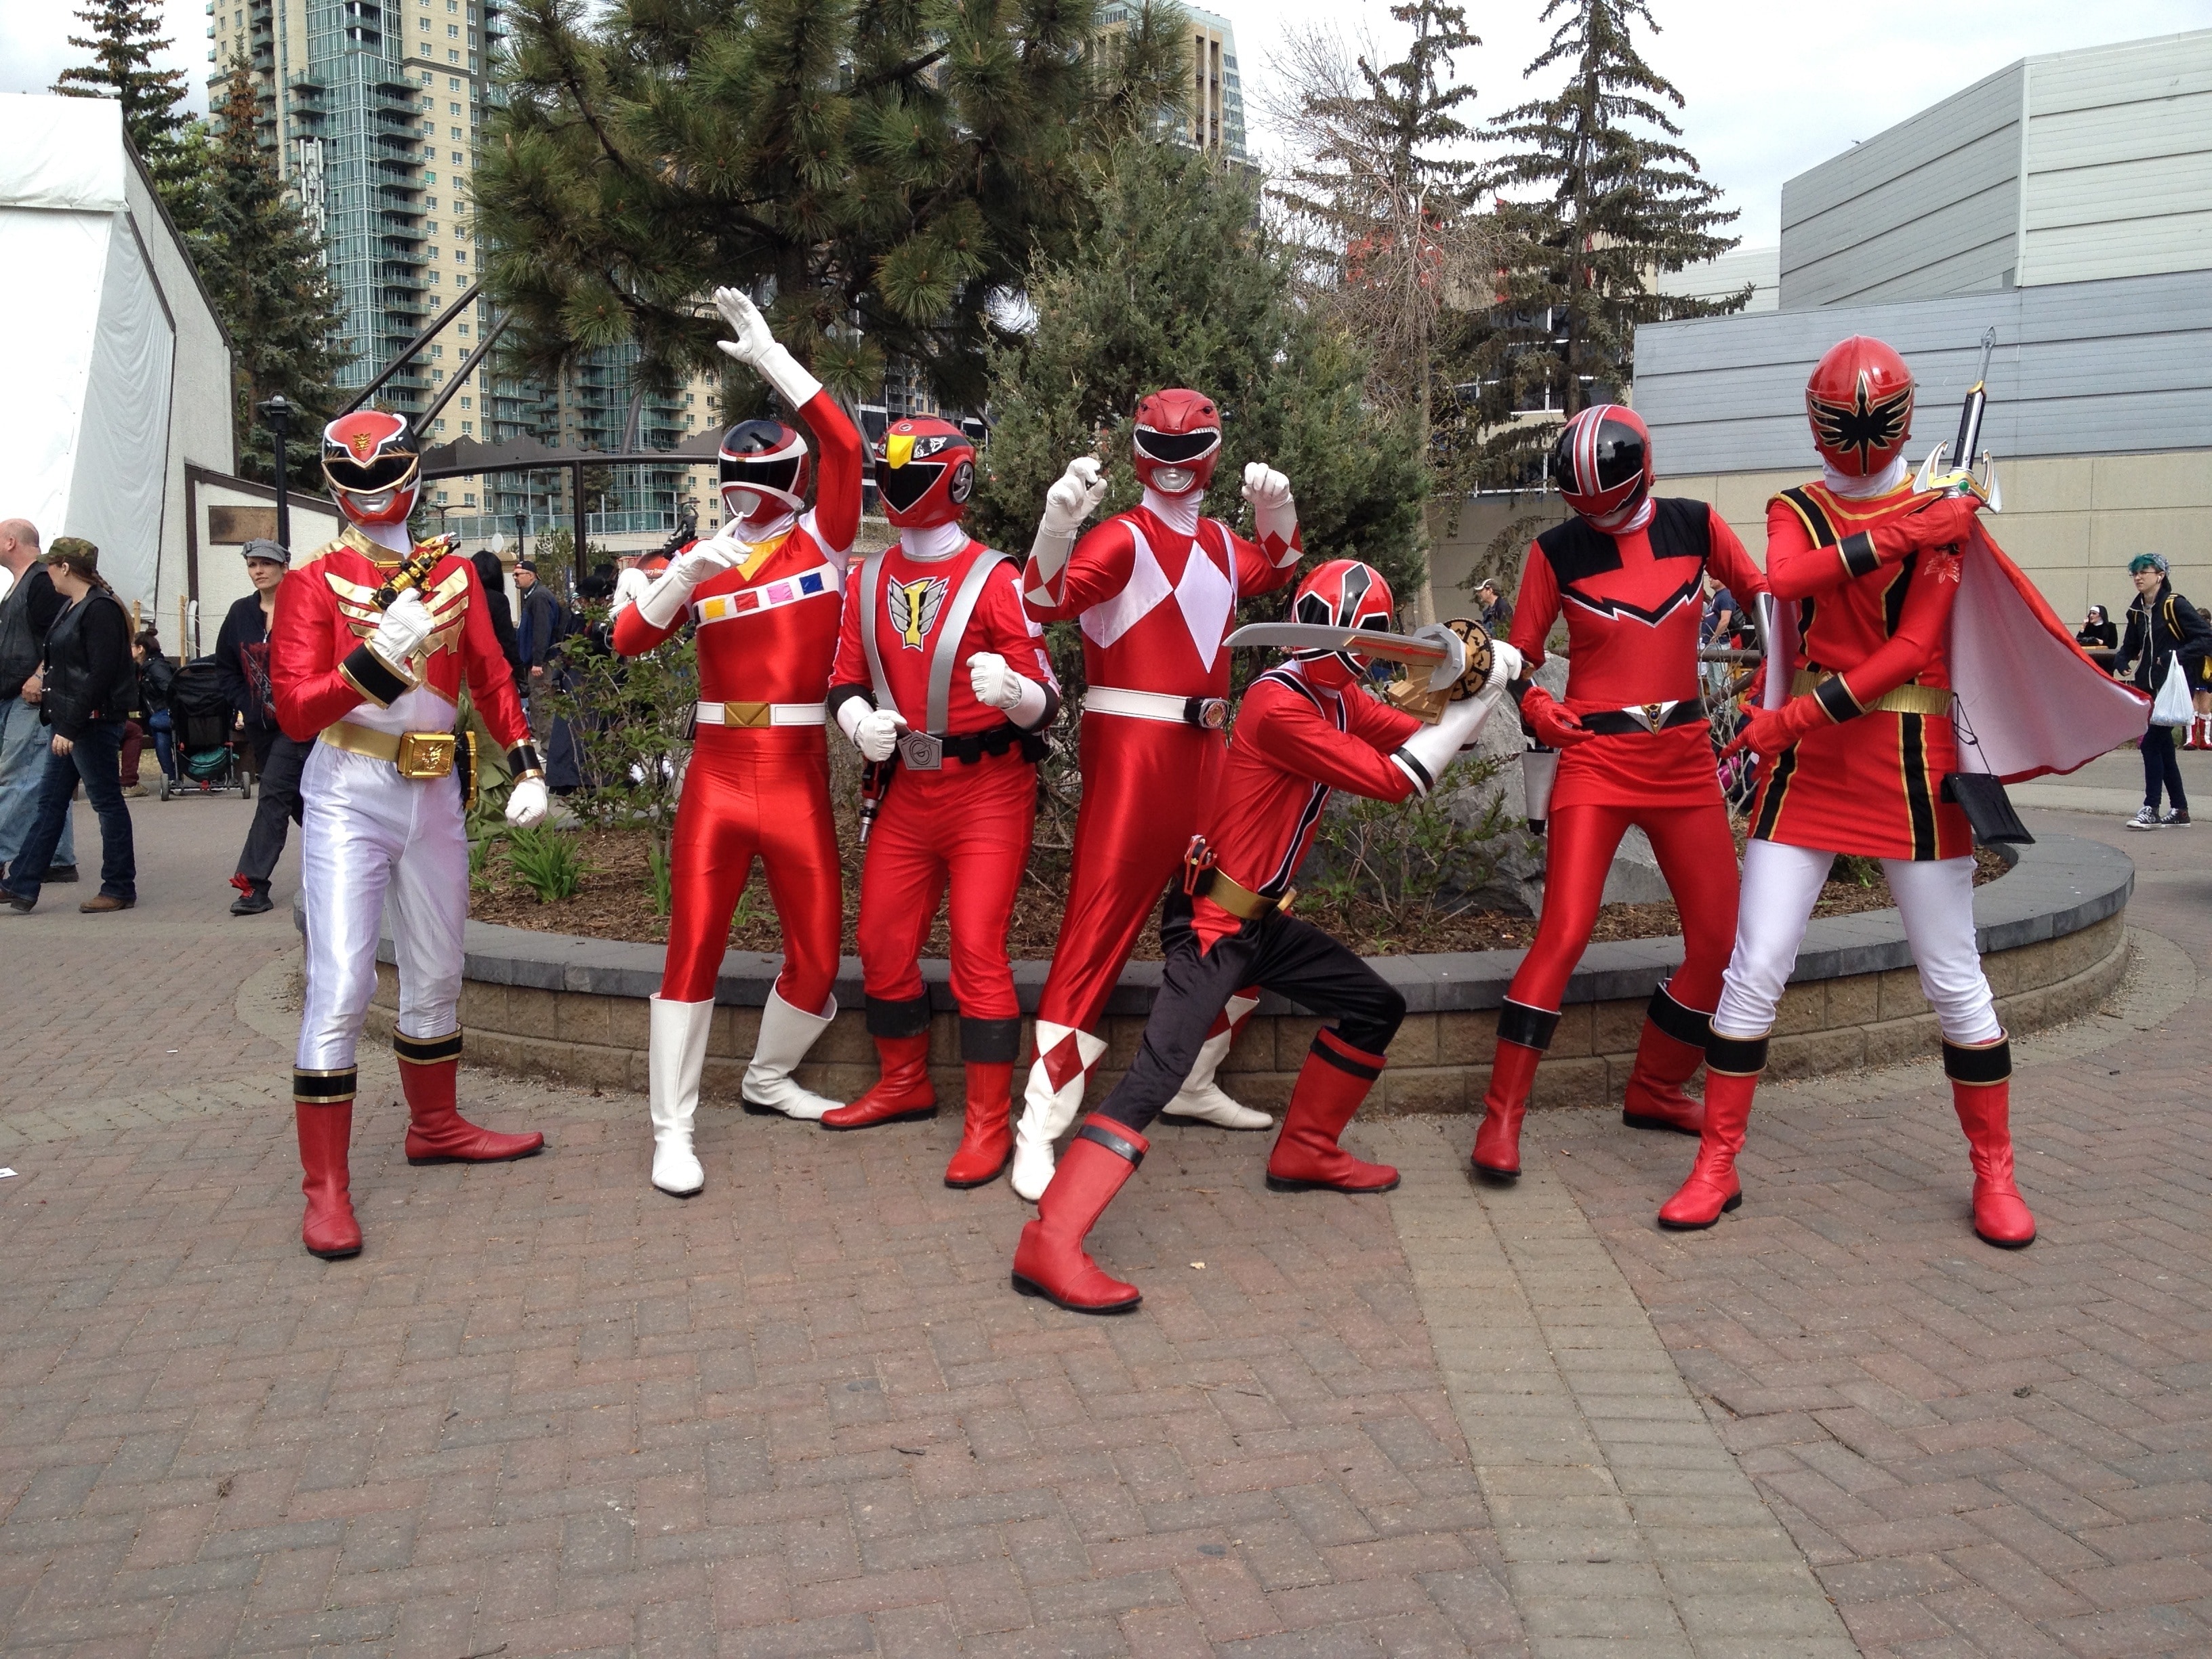 people on red power rangers costume during daytime